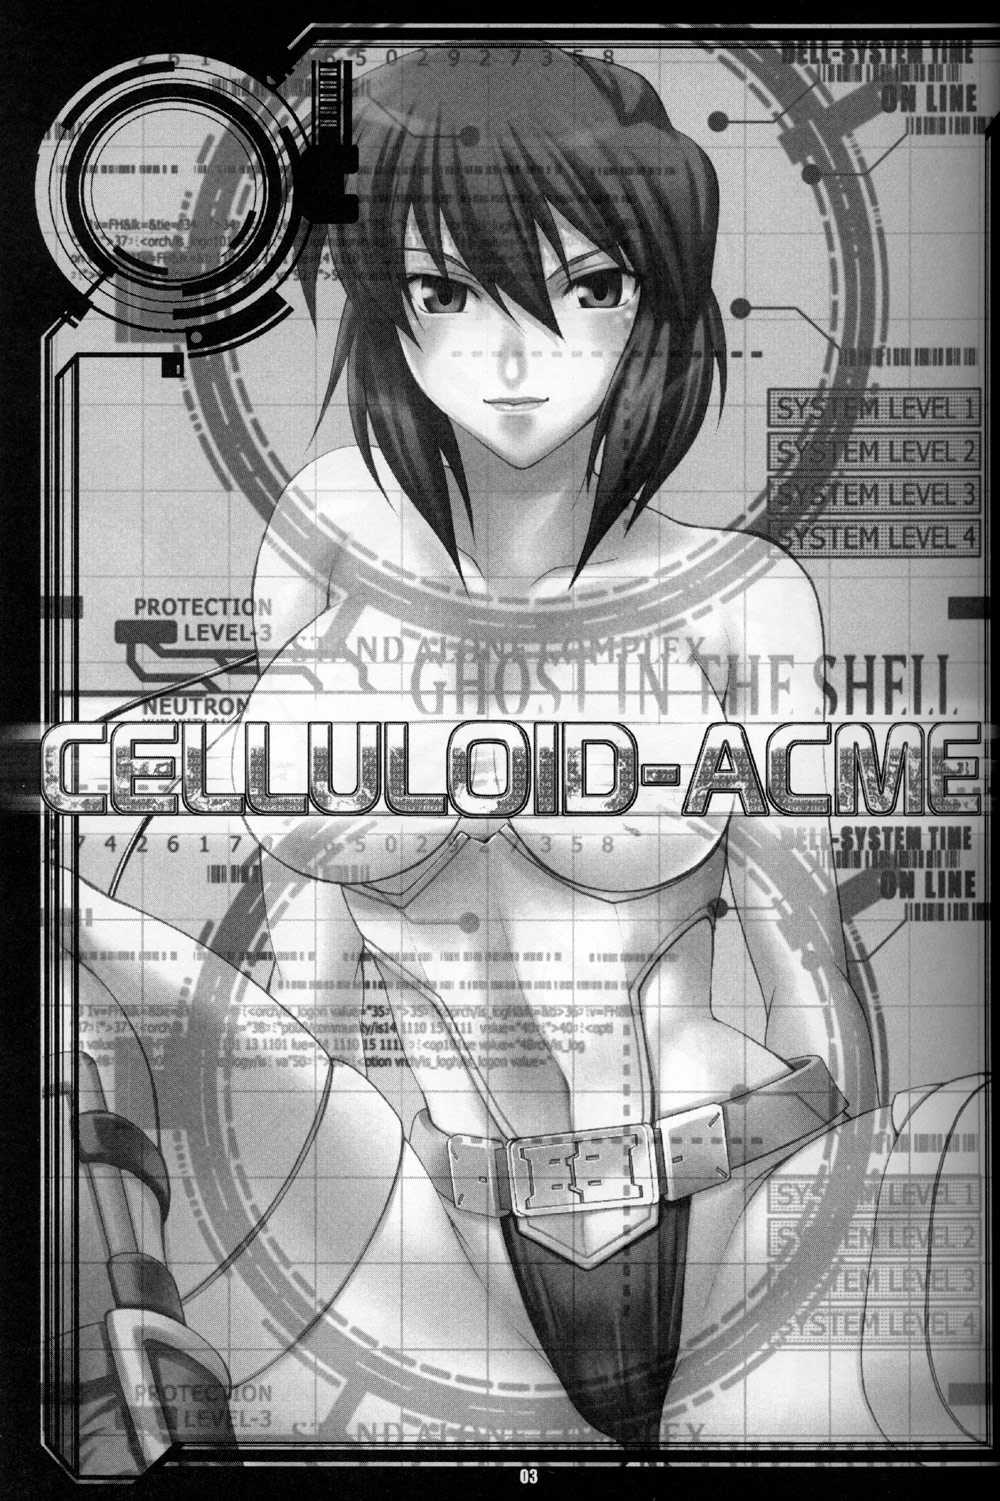 [Runners High] CELLULOID - ACME (Ghost in the Shell) 